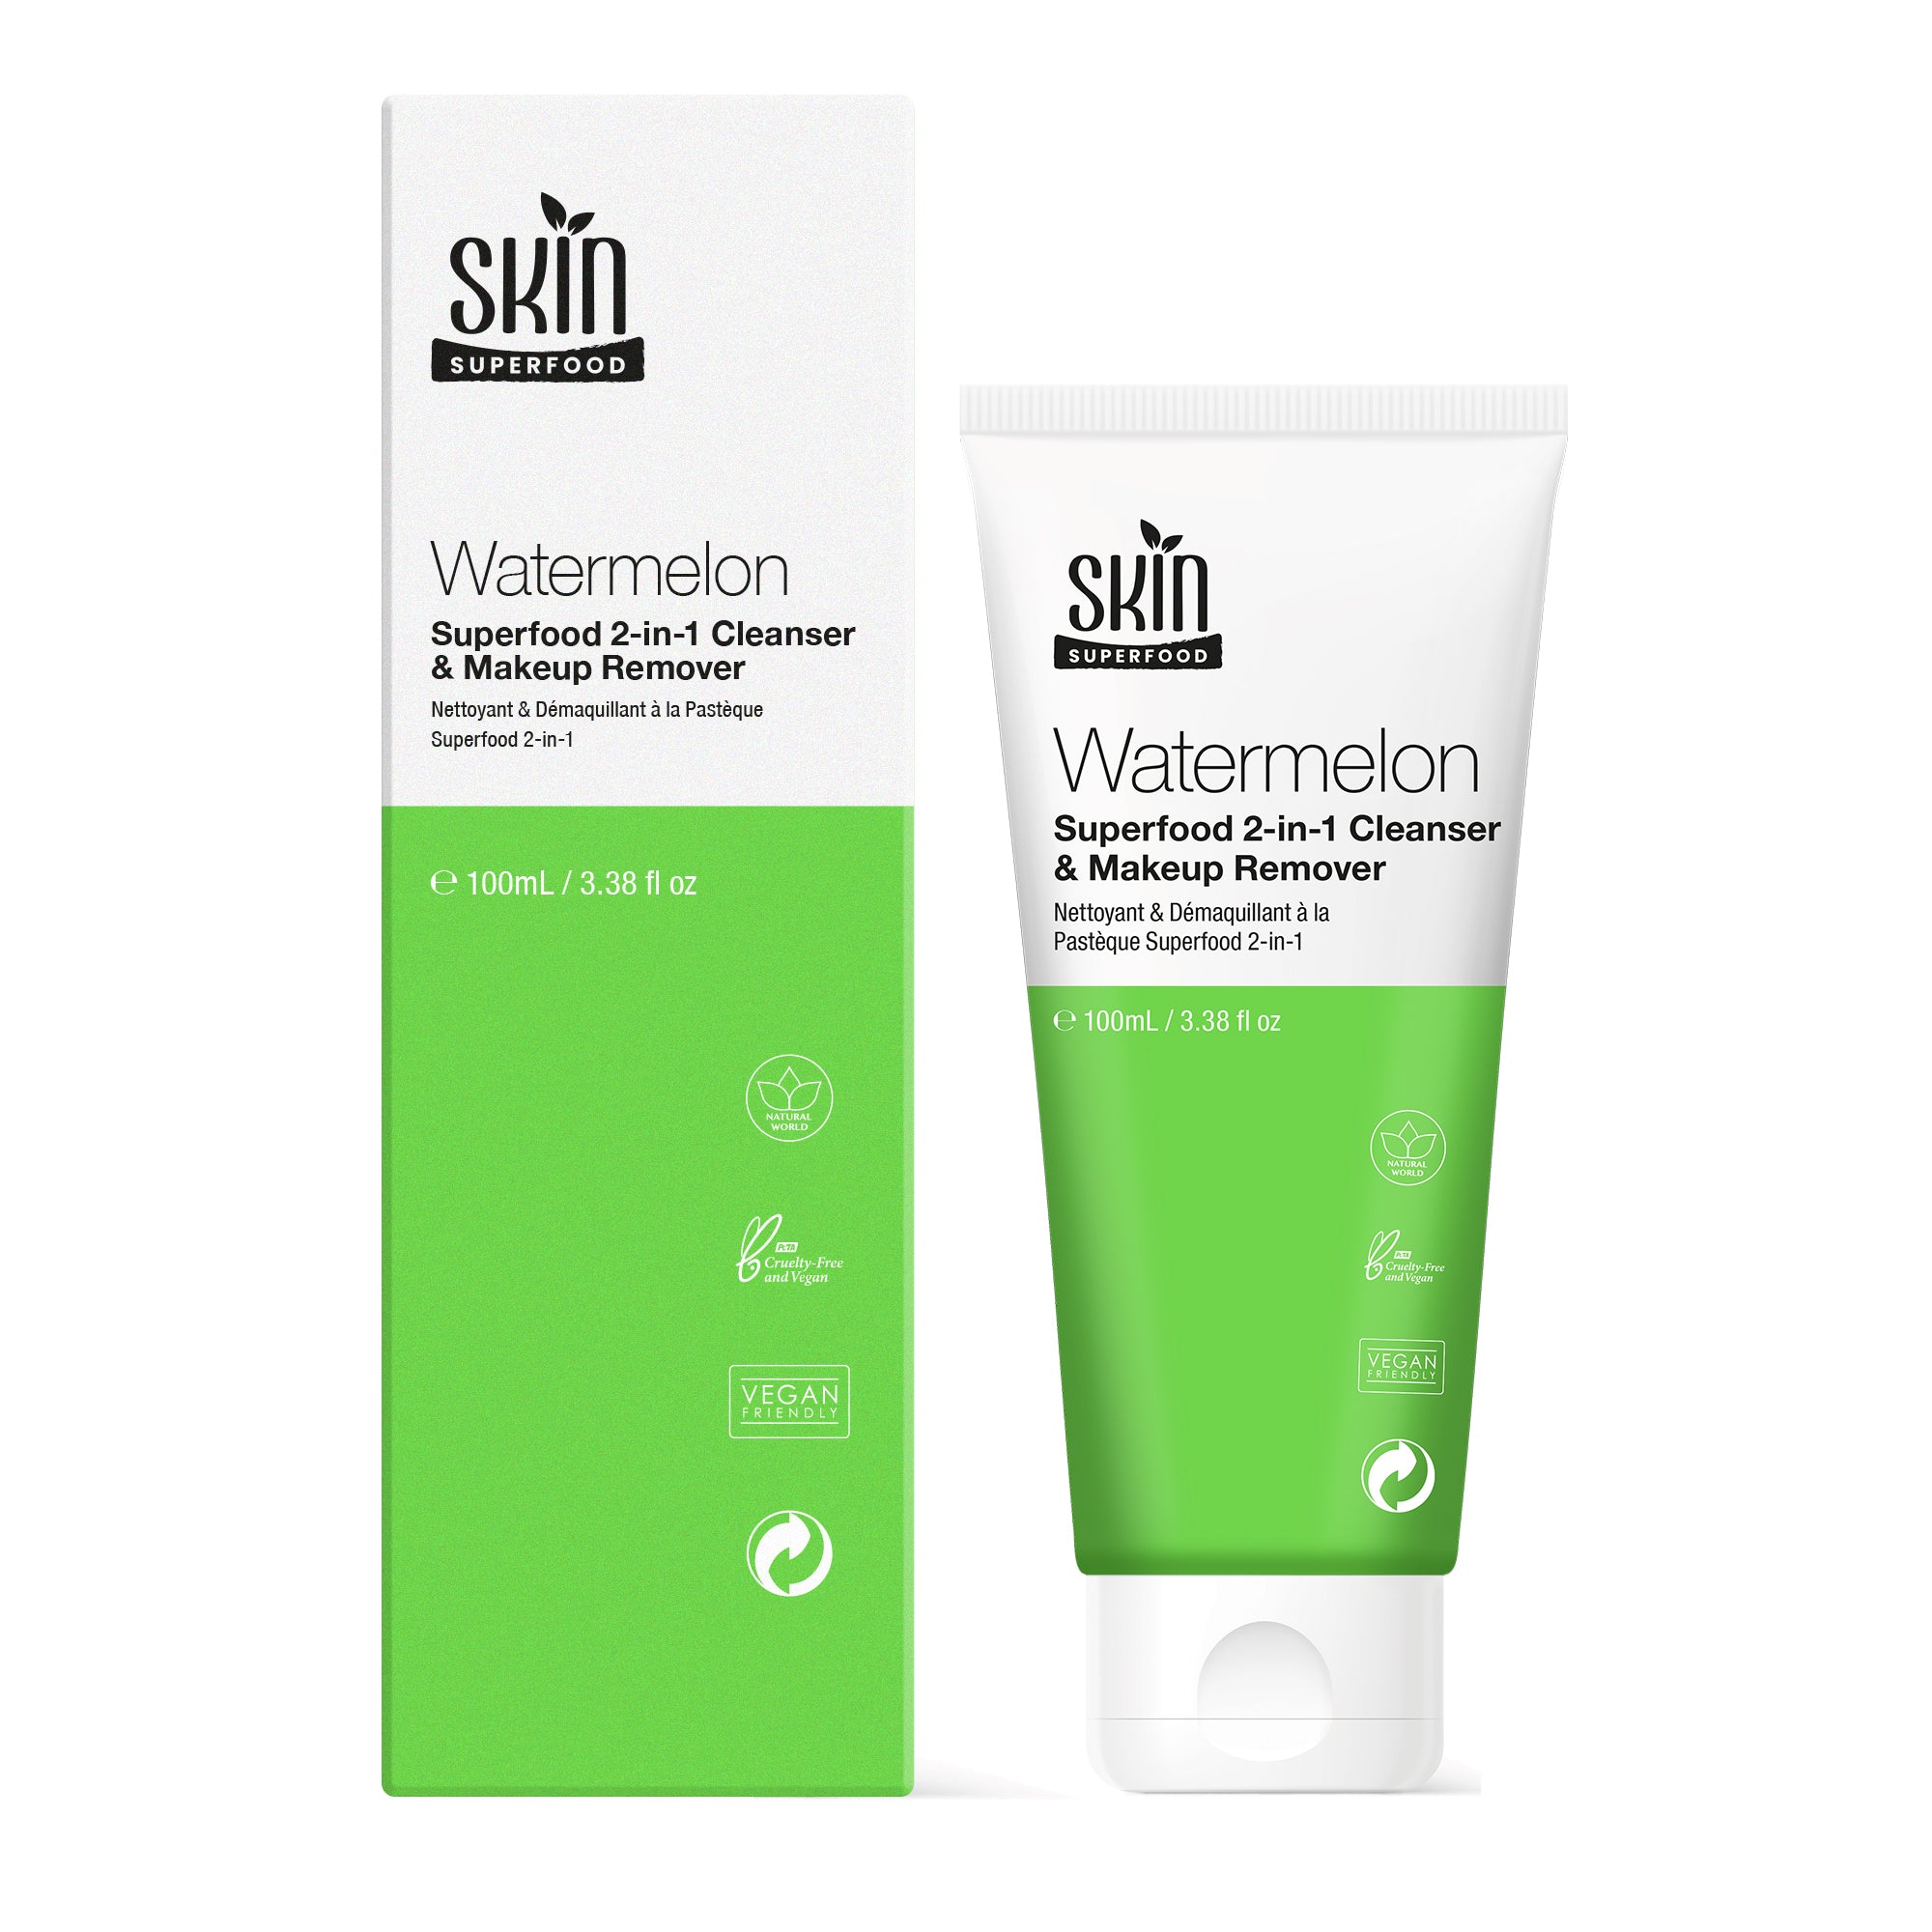 SF Watermelon Superfood 2-in-1 Cleanser & Makeup Remover 100ml